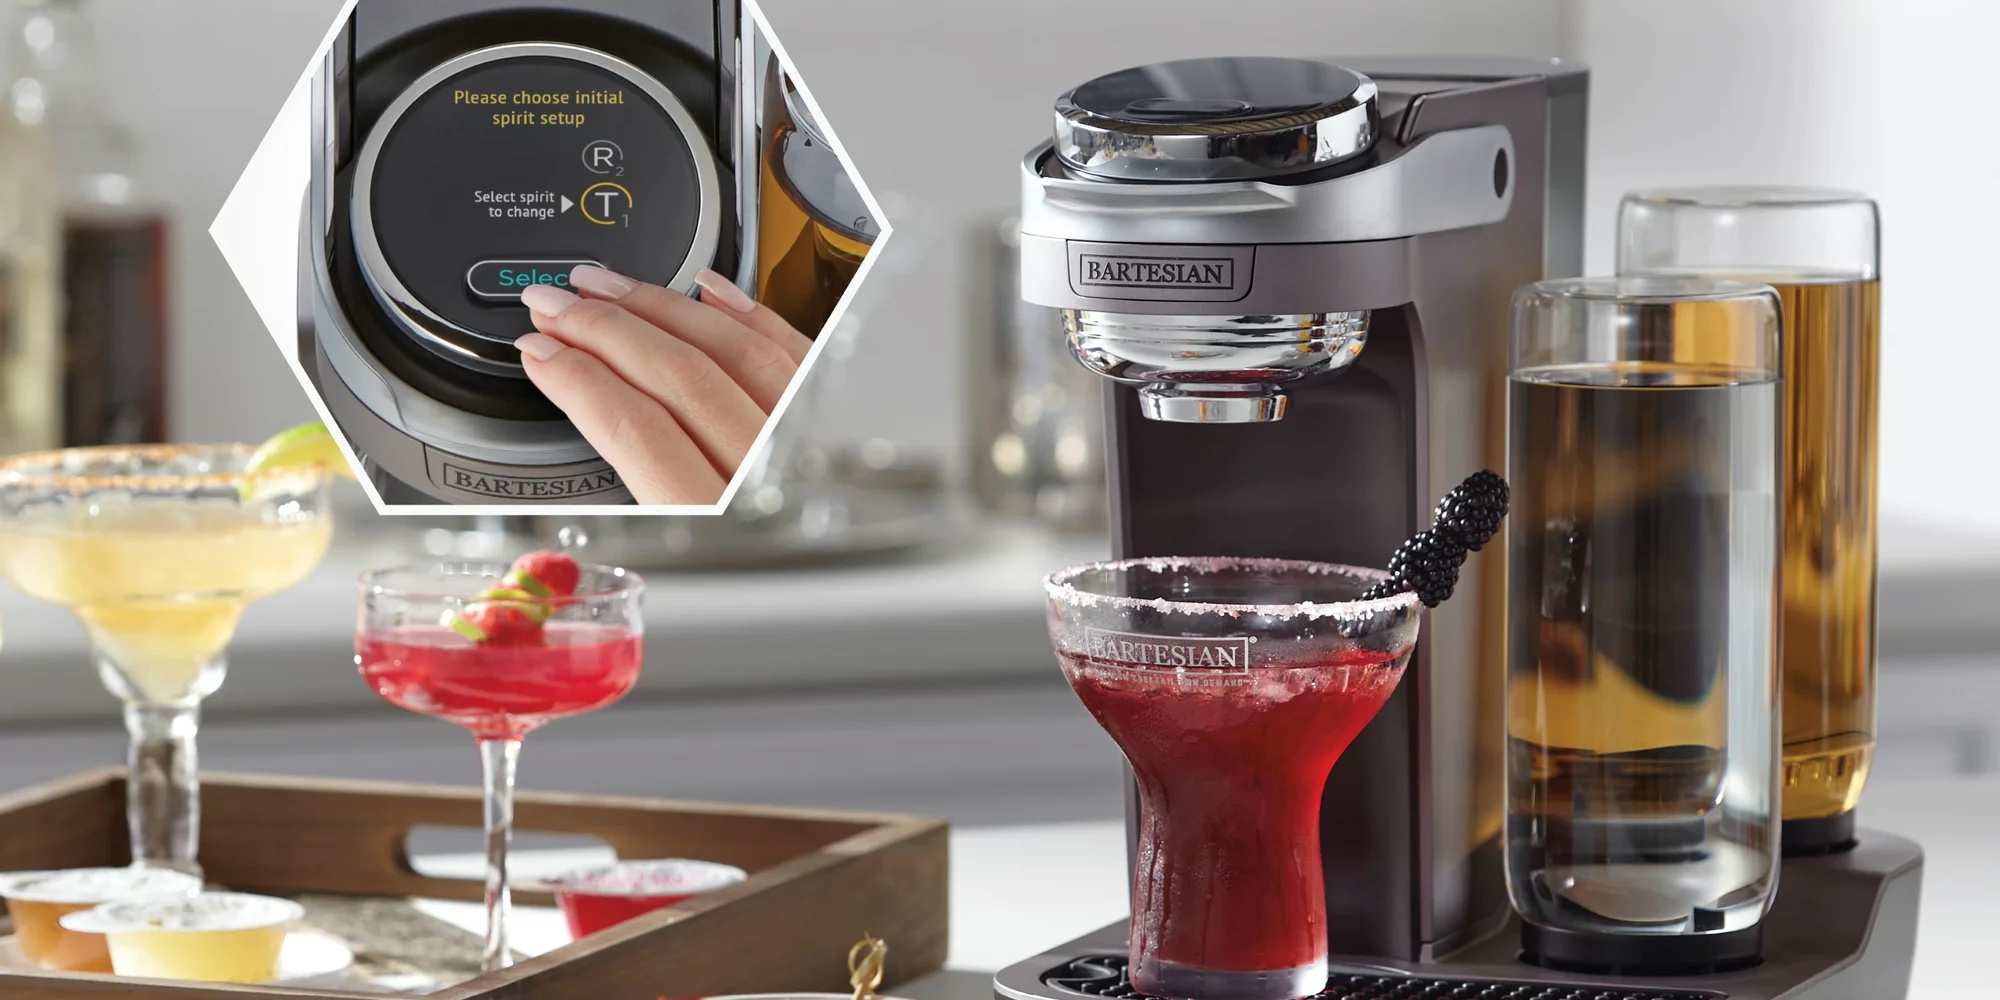 Bartesian premium cocktail maker review - It's the Keurig of cocktail  makers - The Gadgeteer